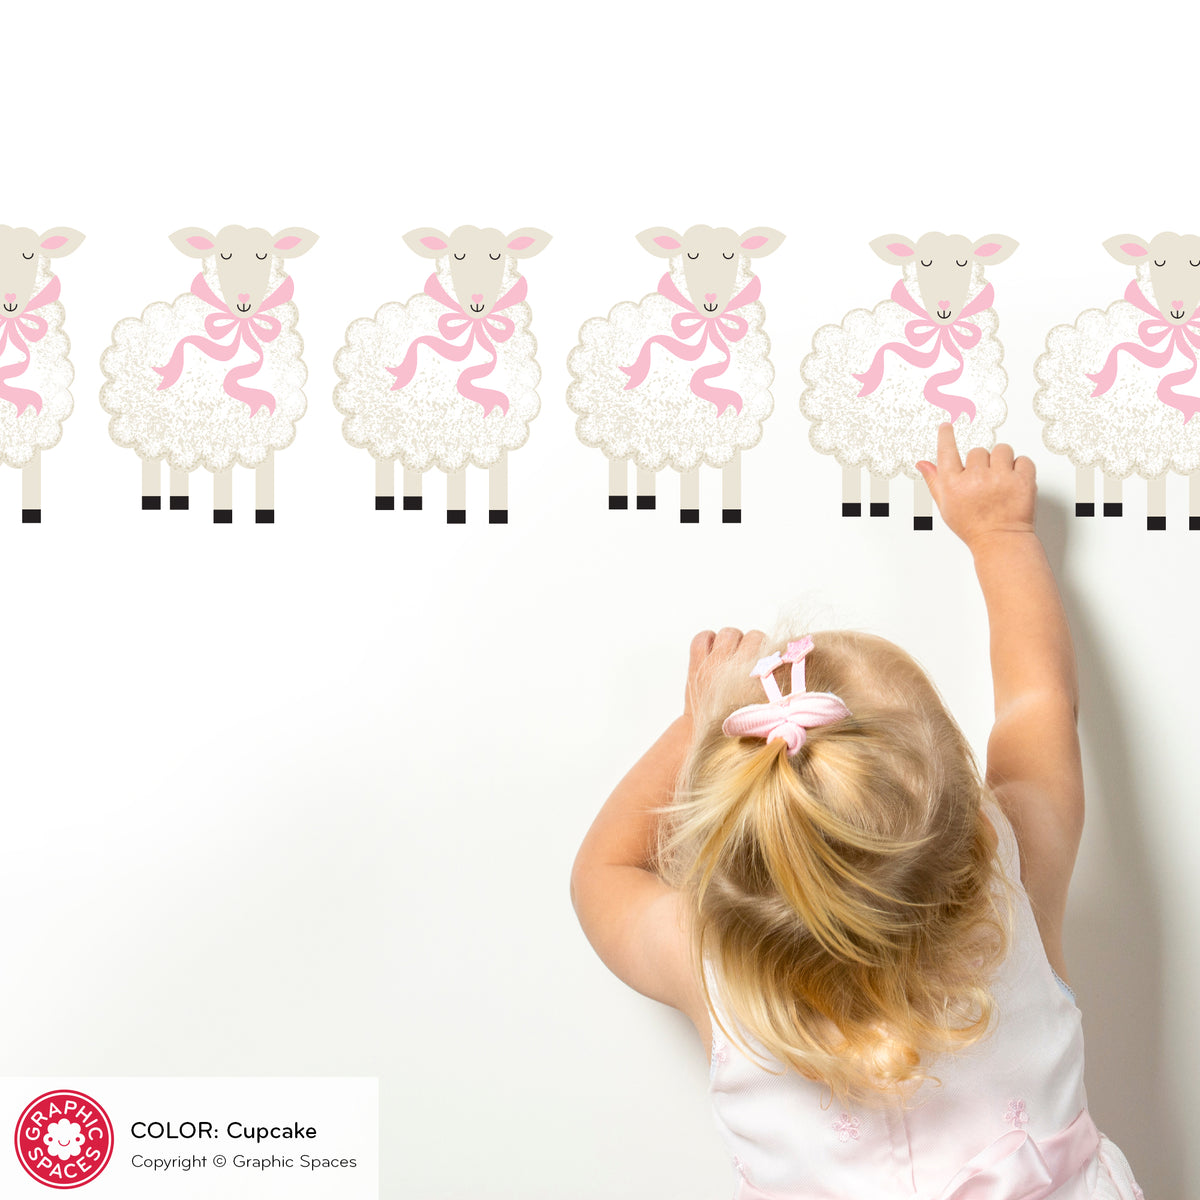 Sheep Scatter Fabric Wall Decals - Pack of 15